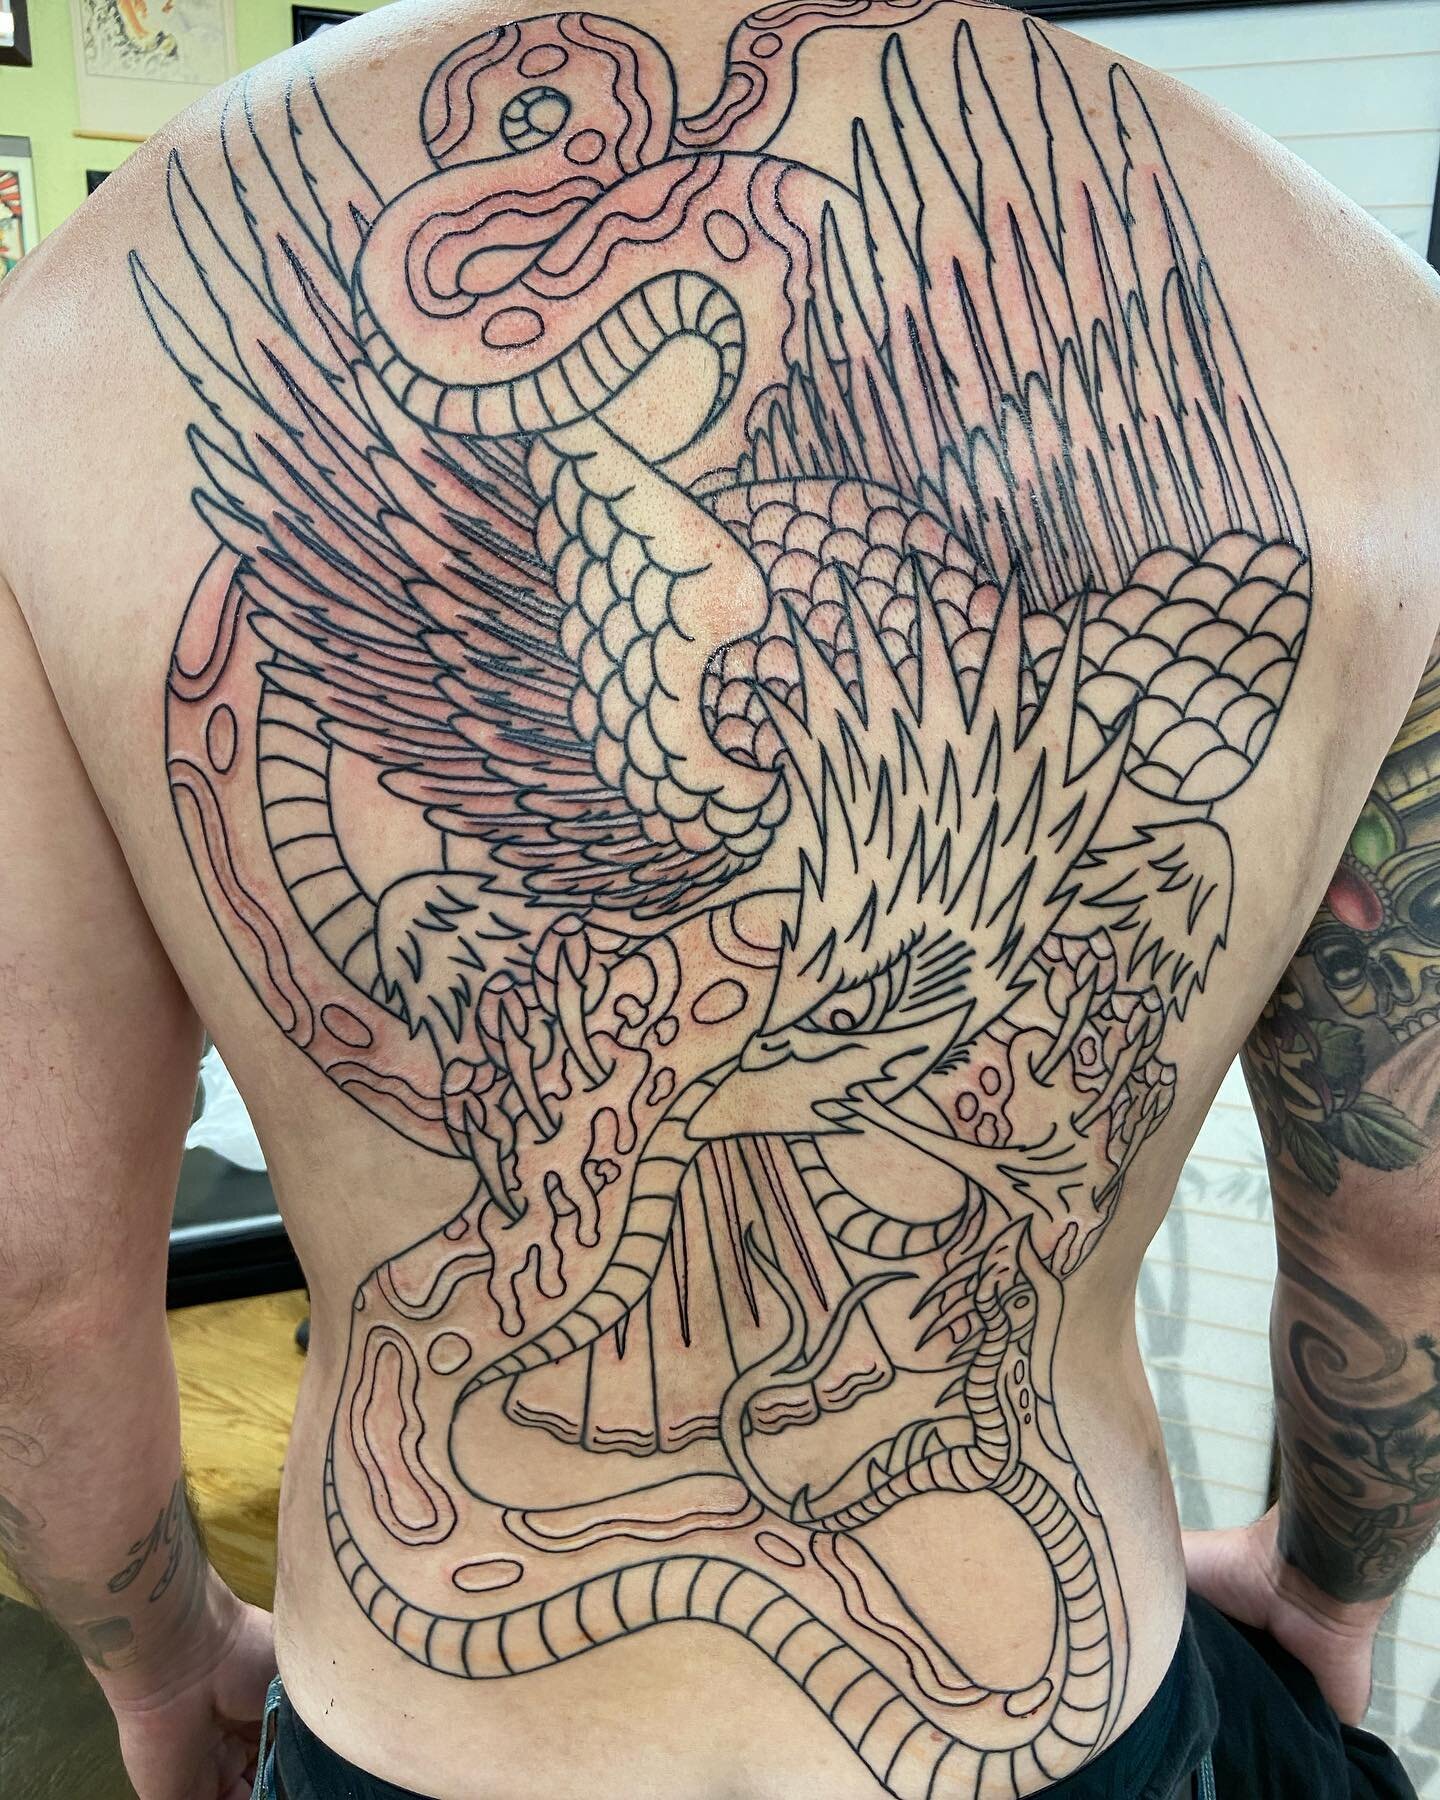 Back piece started by @noryanbaker Contact him to start a larger project. #ironandgoldtattoo #spokanetattoo #backpiece #spokane #spokaneart #spokanevalleytattoo #easternwashington #seattle #pullmanwashington